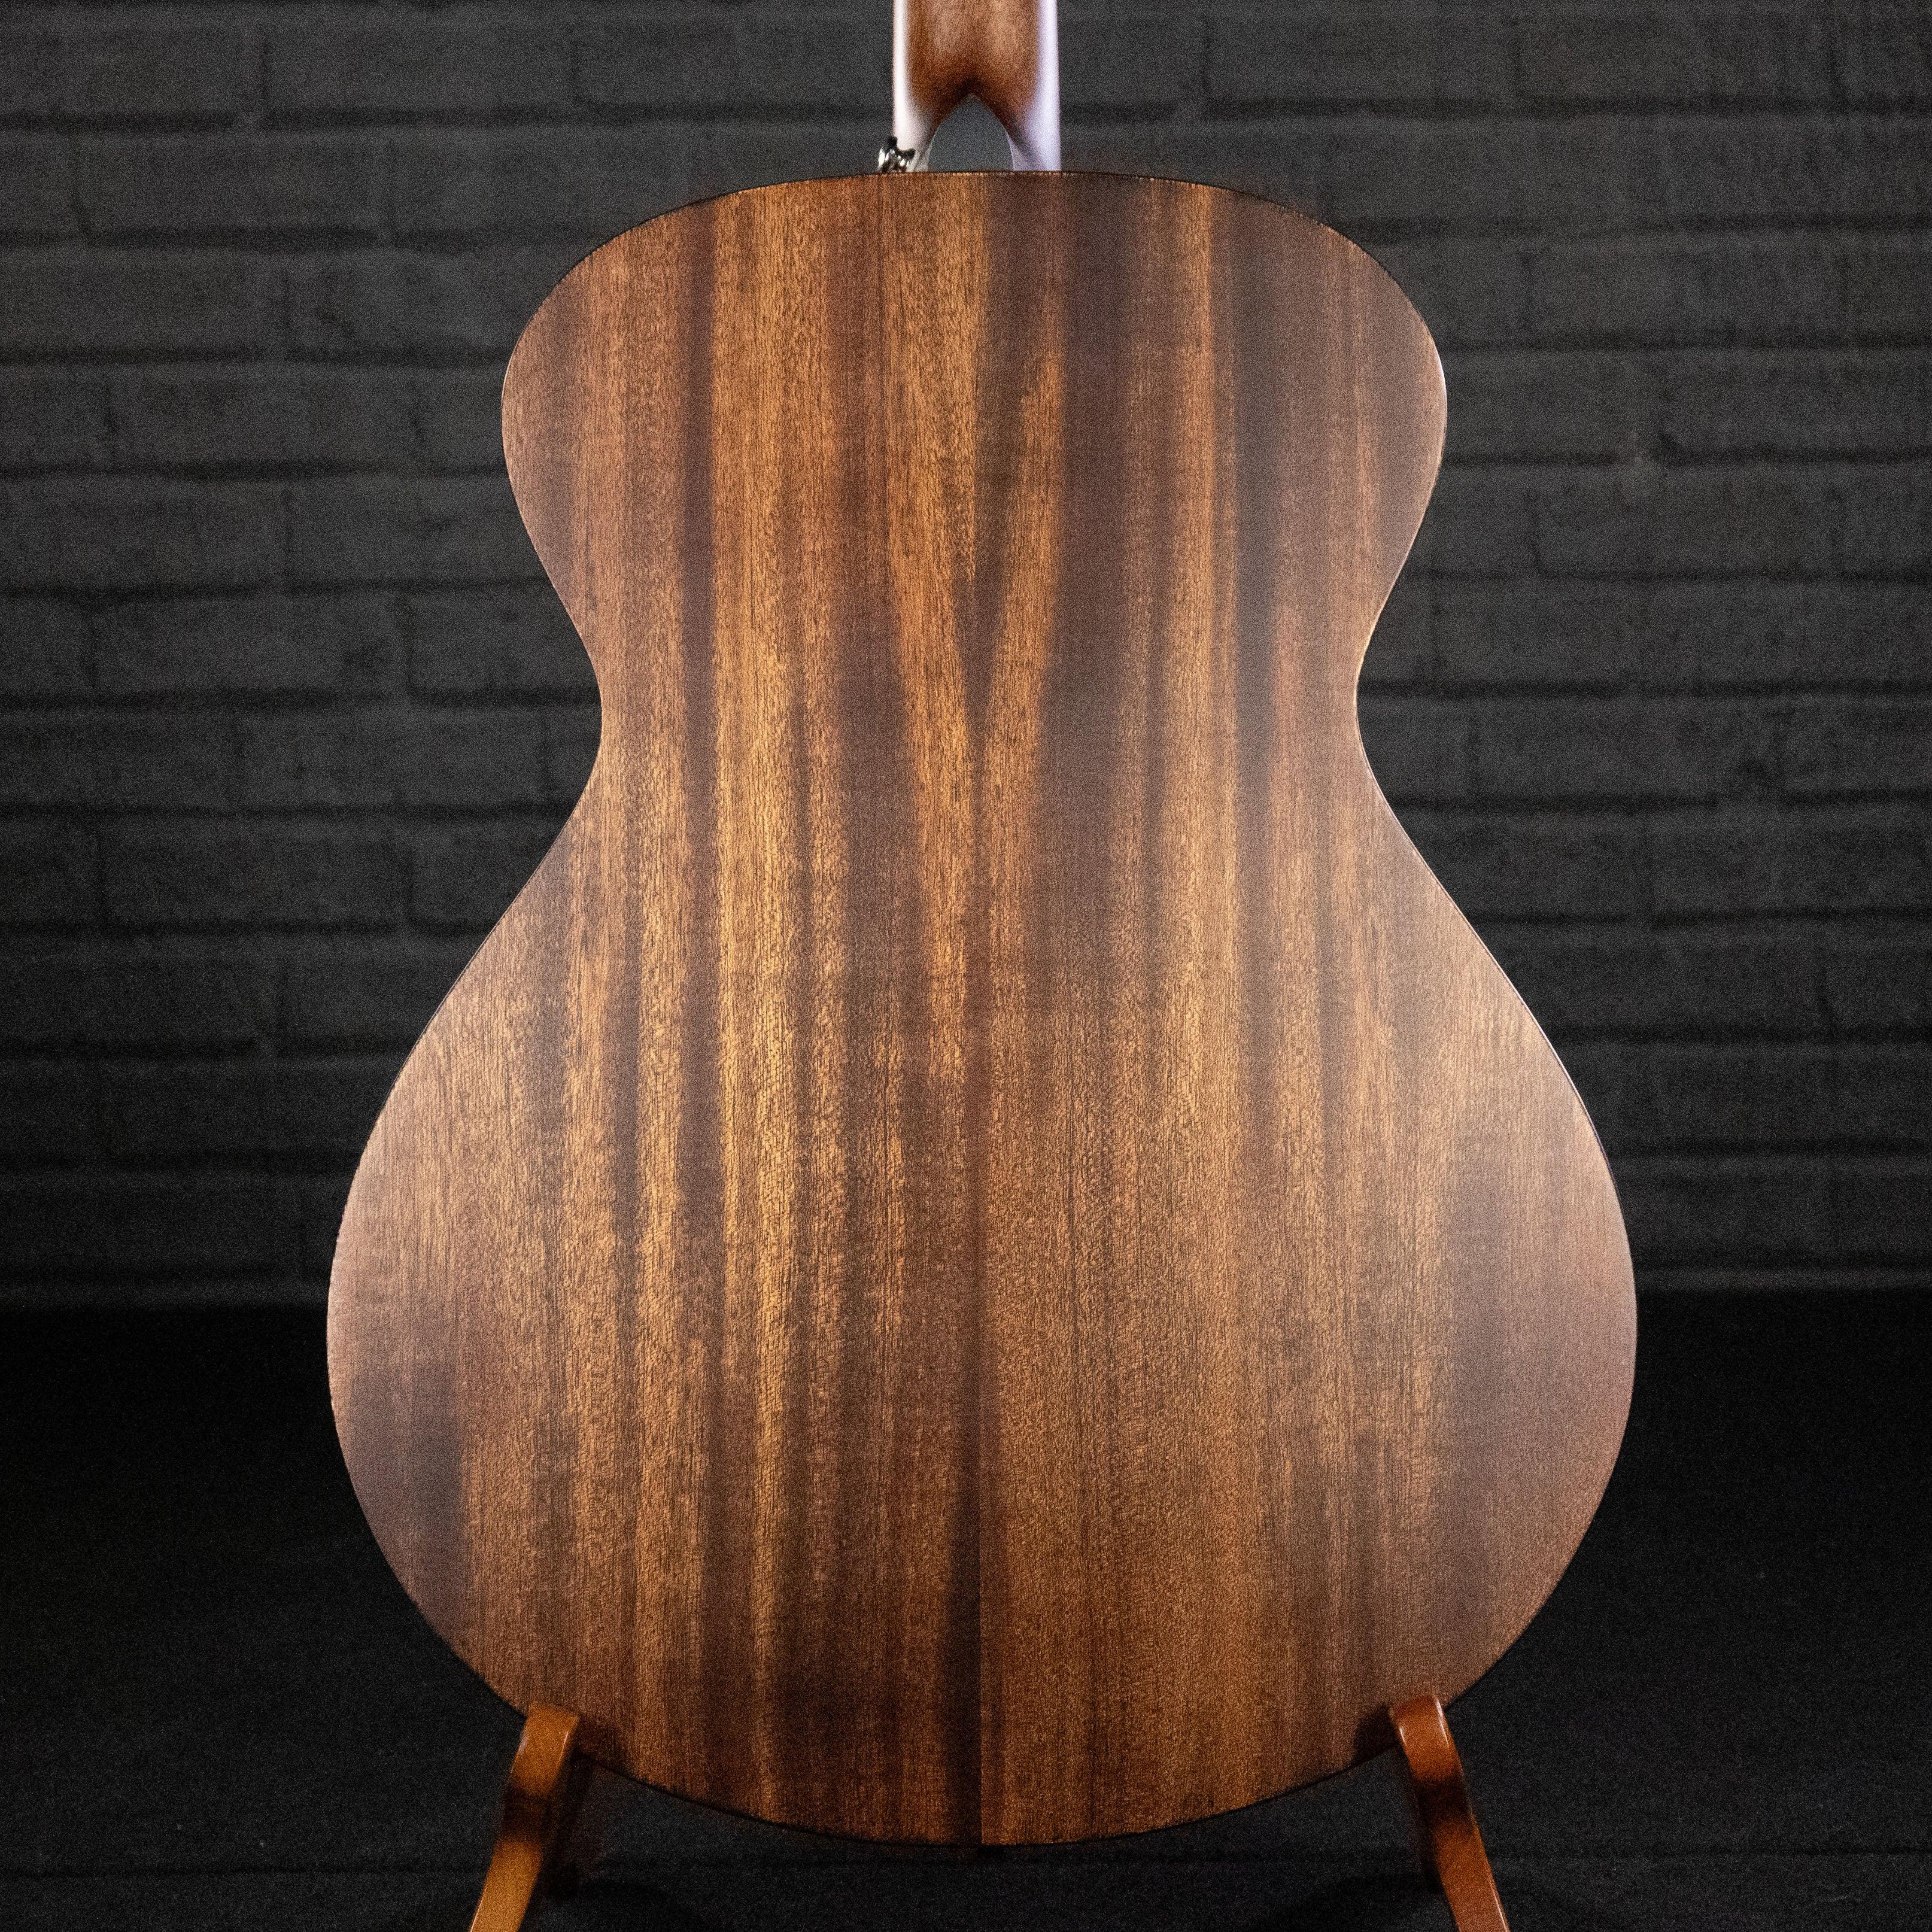 Breedlove Discovery S Concert (European Spruce - African Mahogany) - Impulse Music Co.